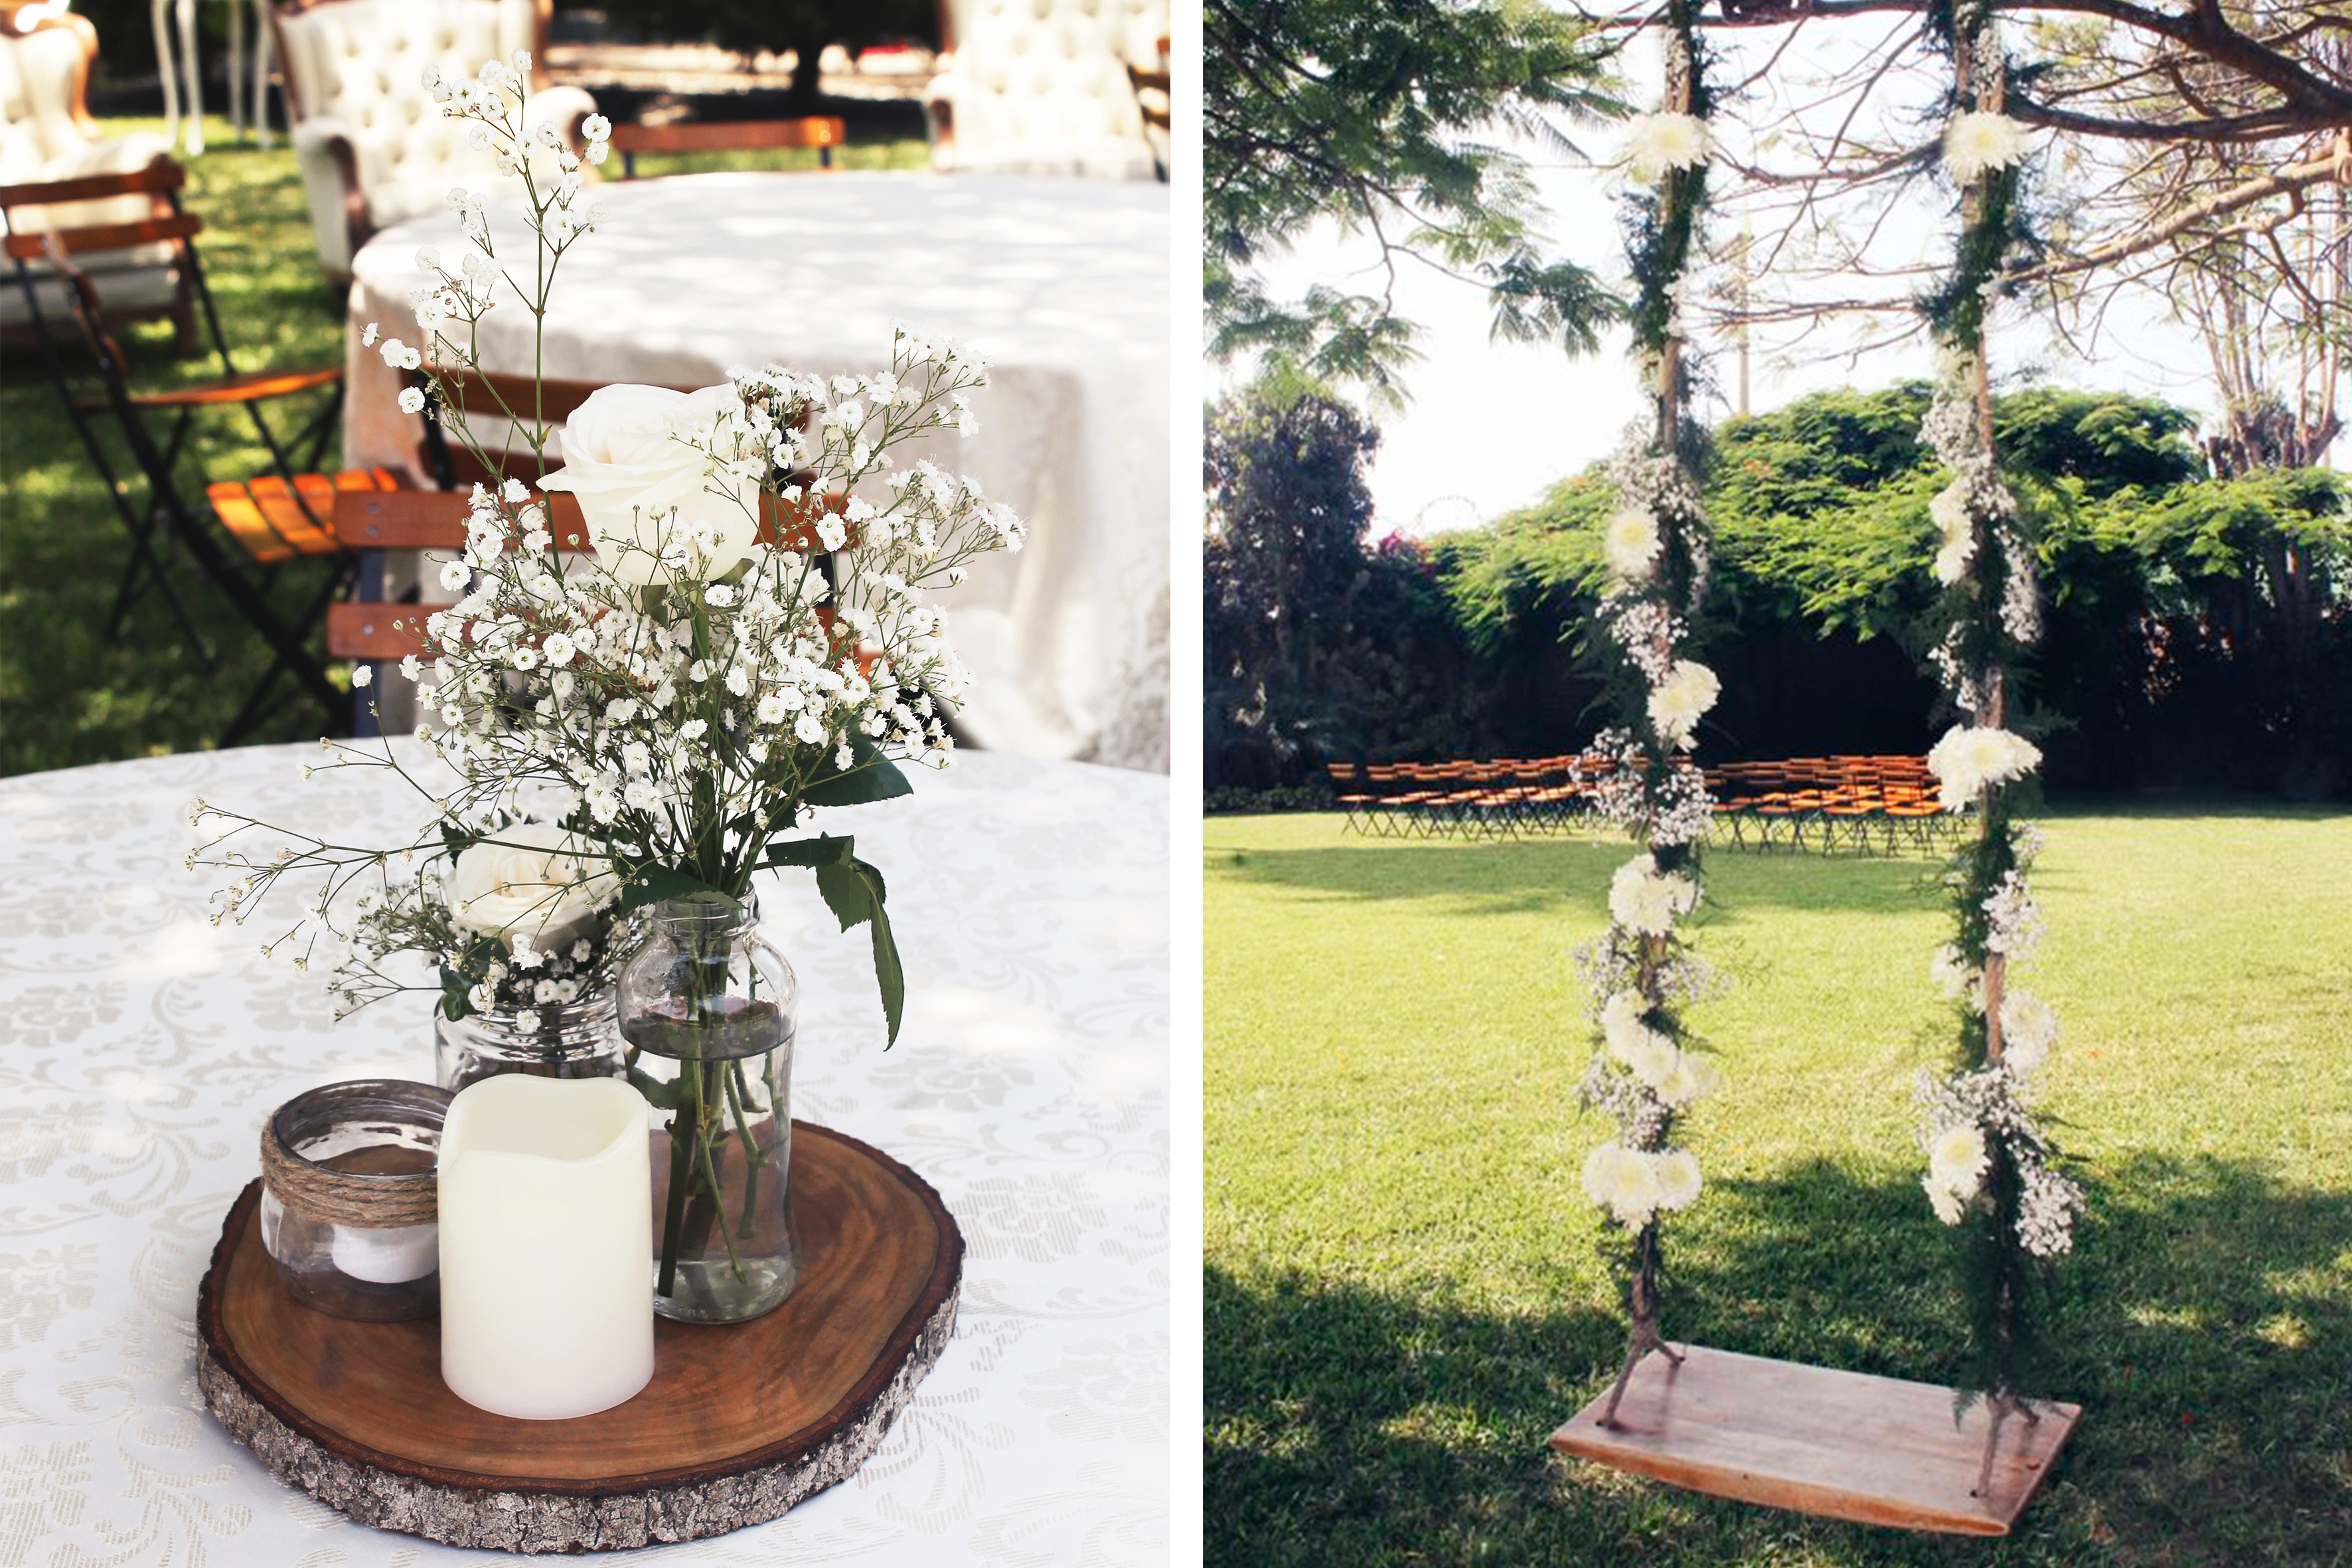 Rustic style centerpiece and swing